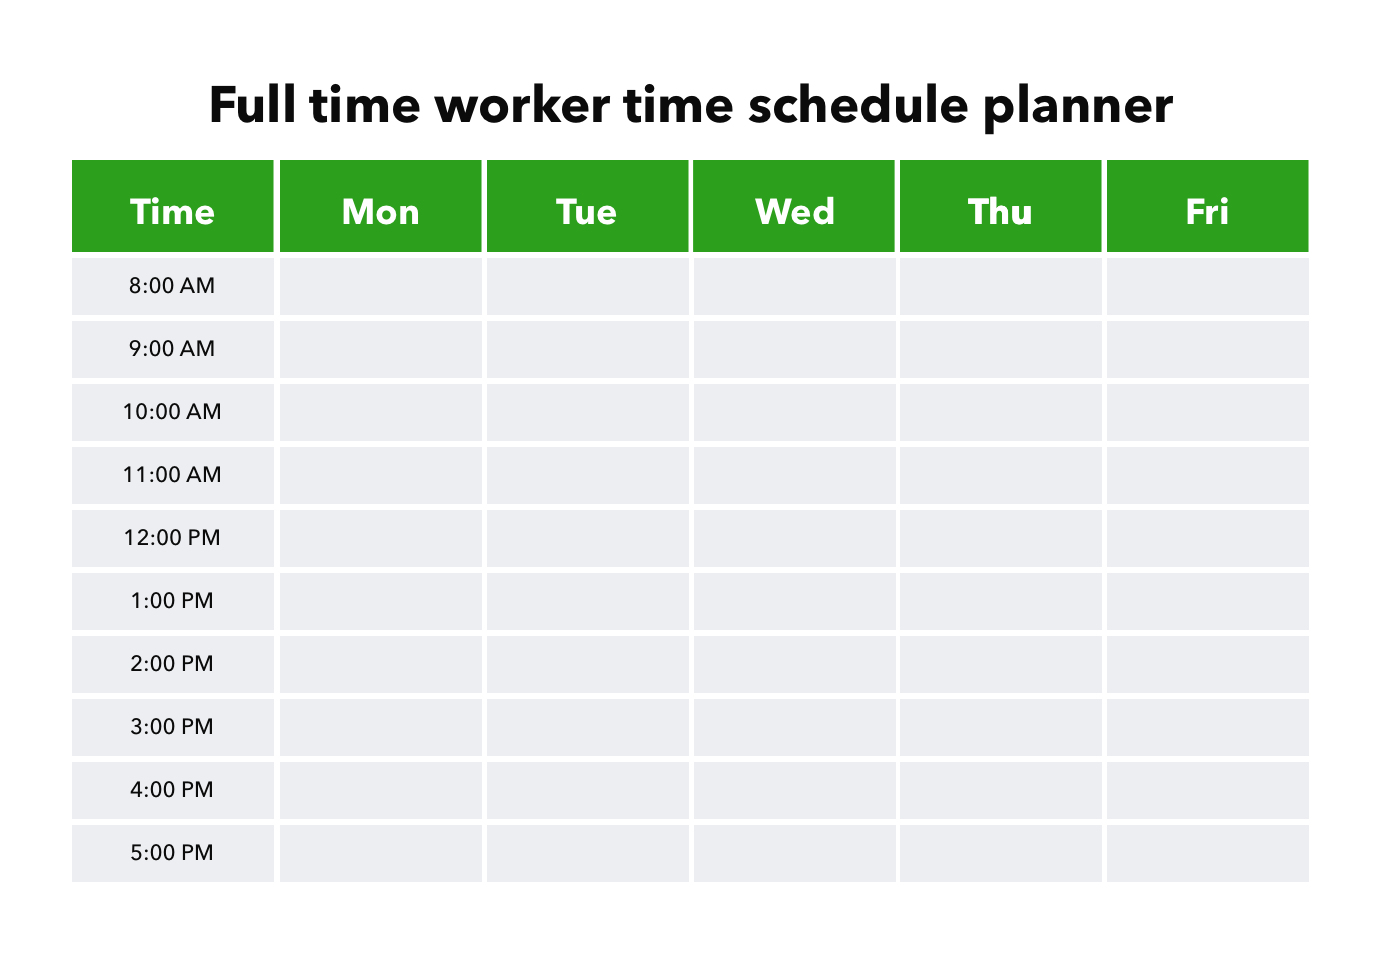 Full time worker schedule planner